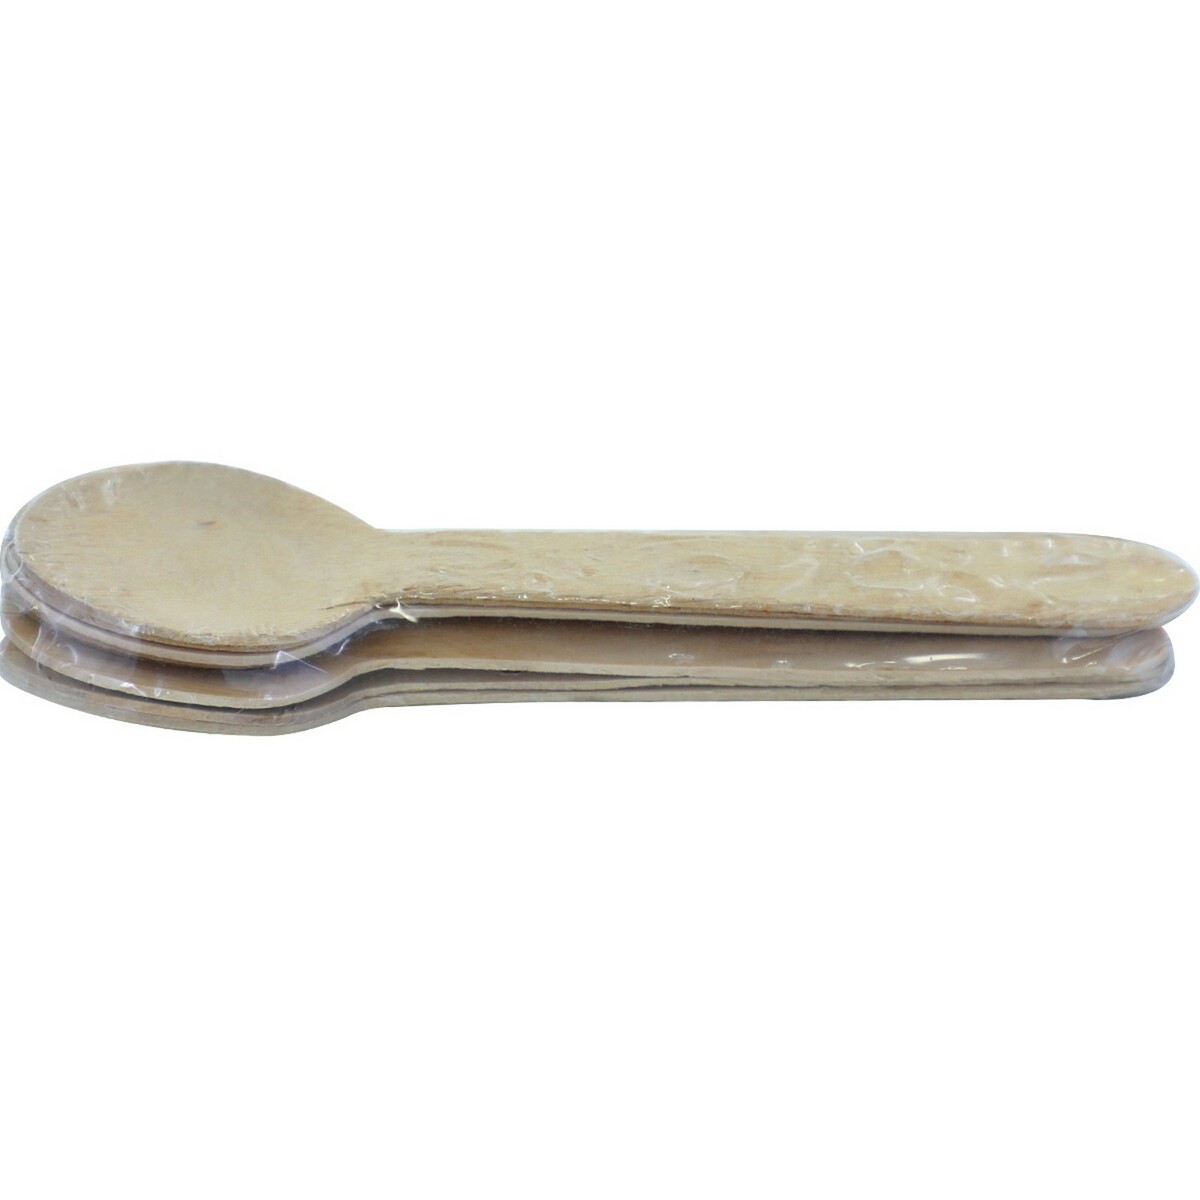 Max Home Wooden Spoon